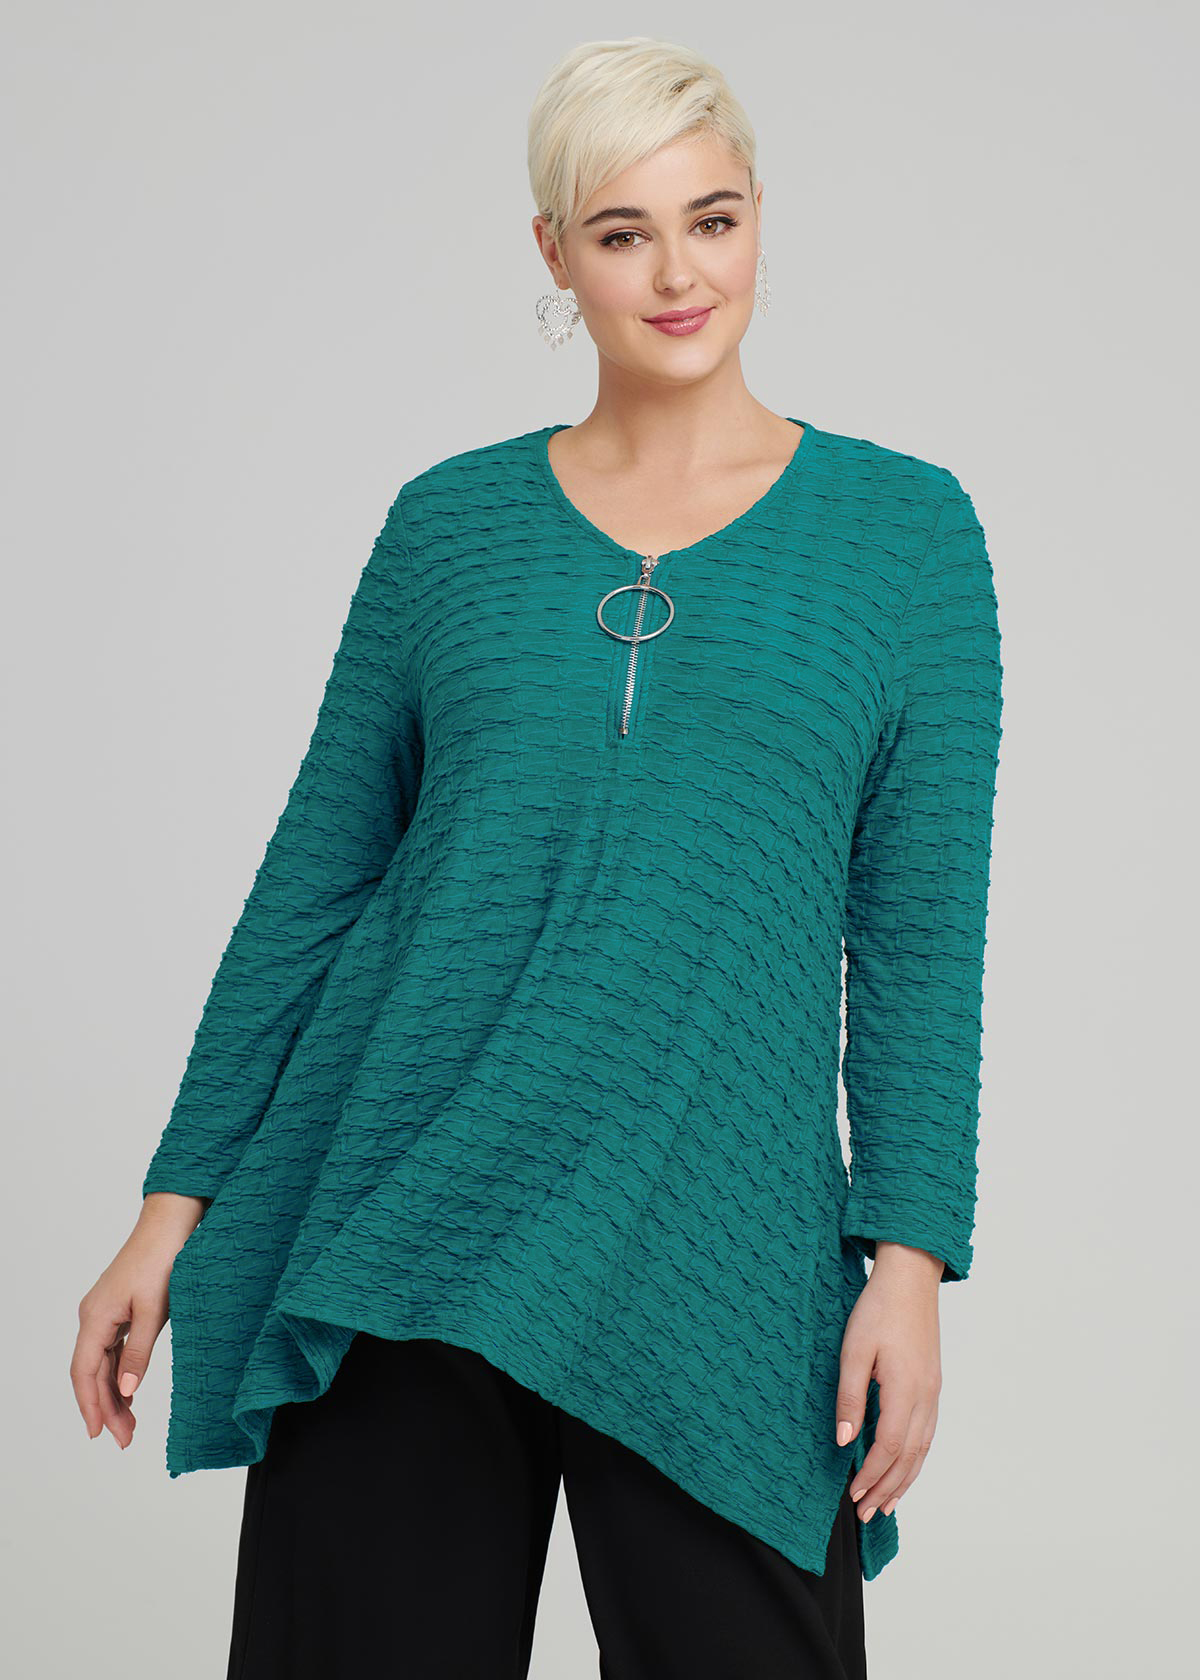 Shop The Ripple Effect Top in Green in sizes 12 to 30 | Taking Shape AU